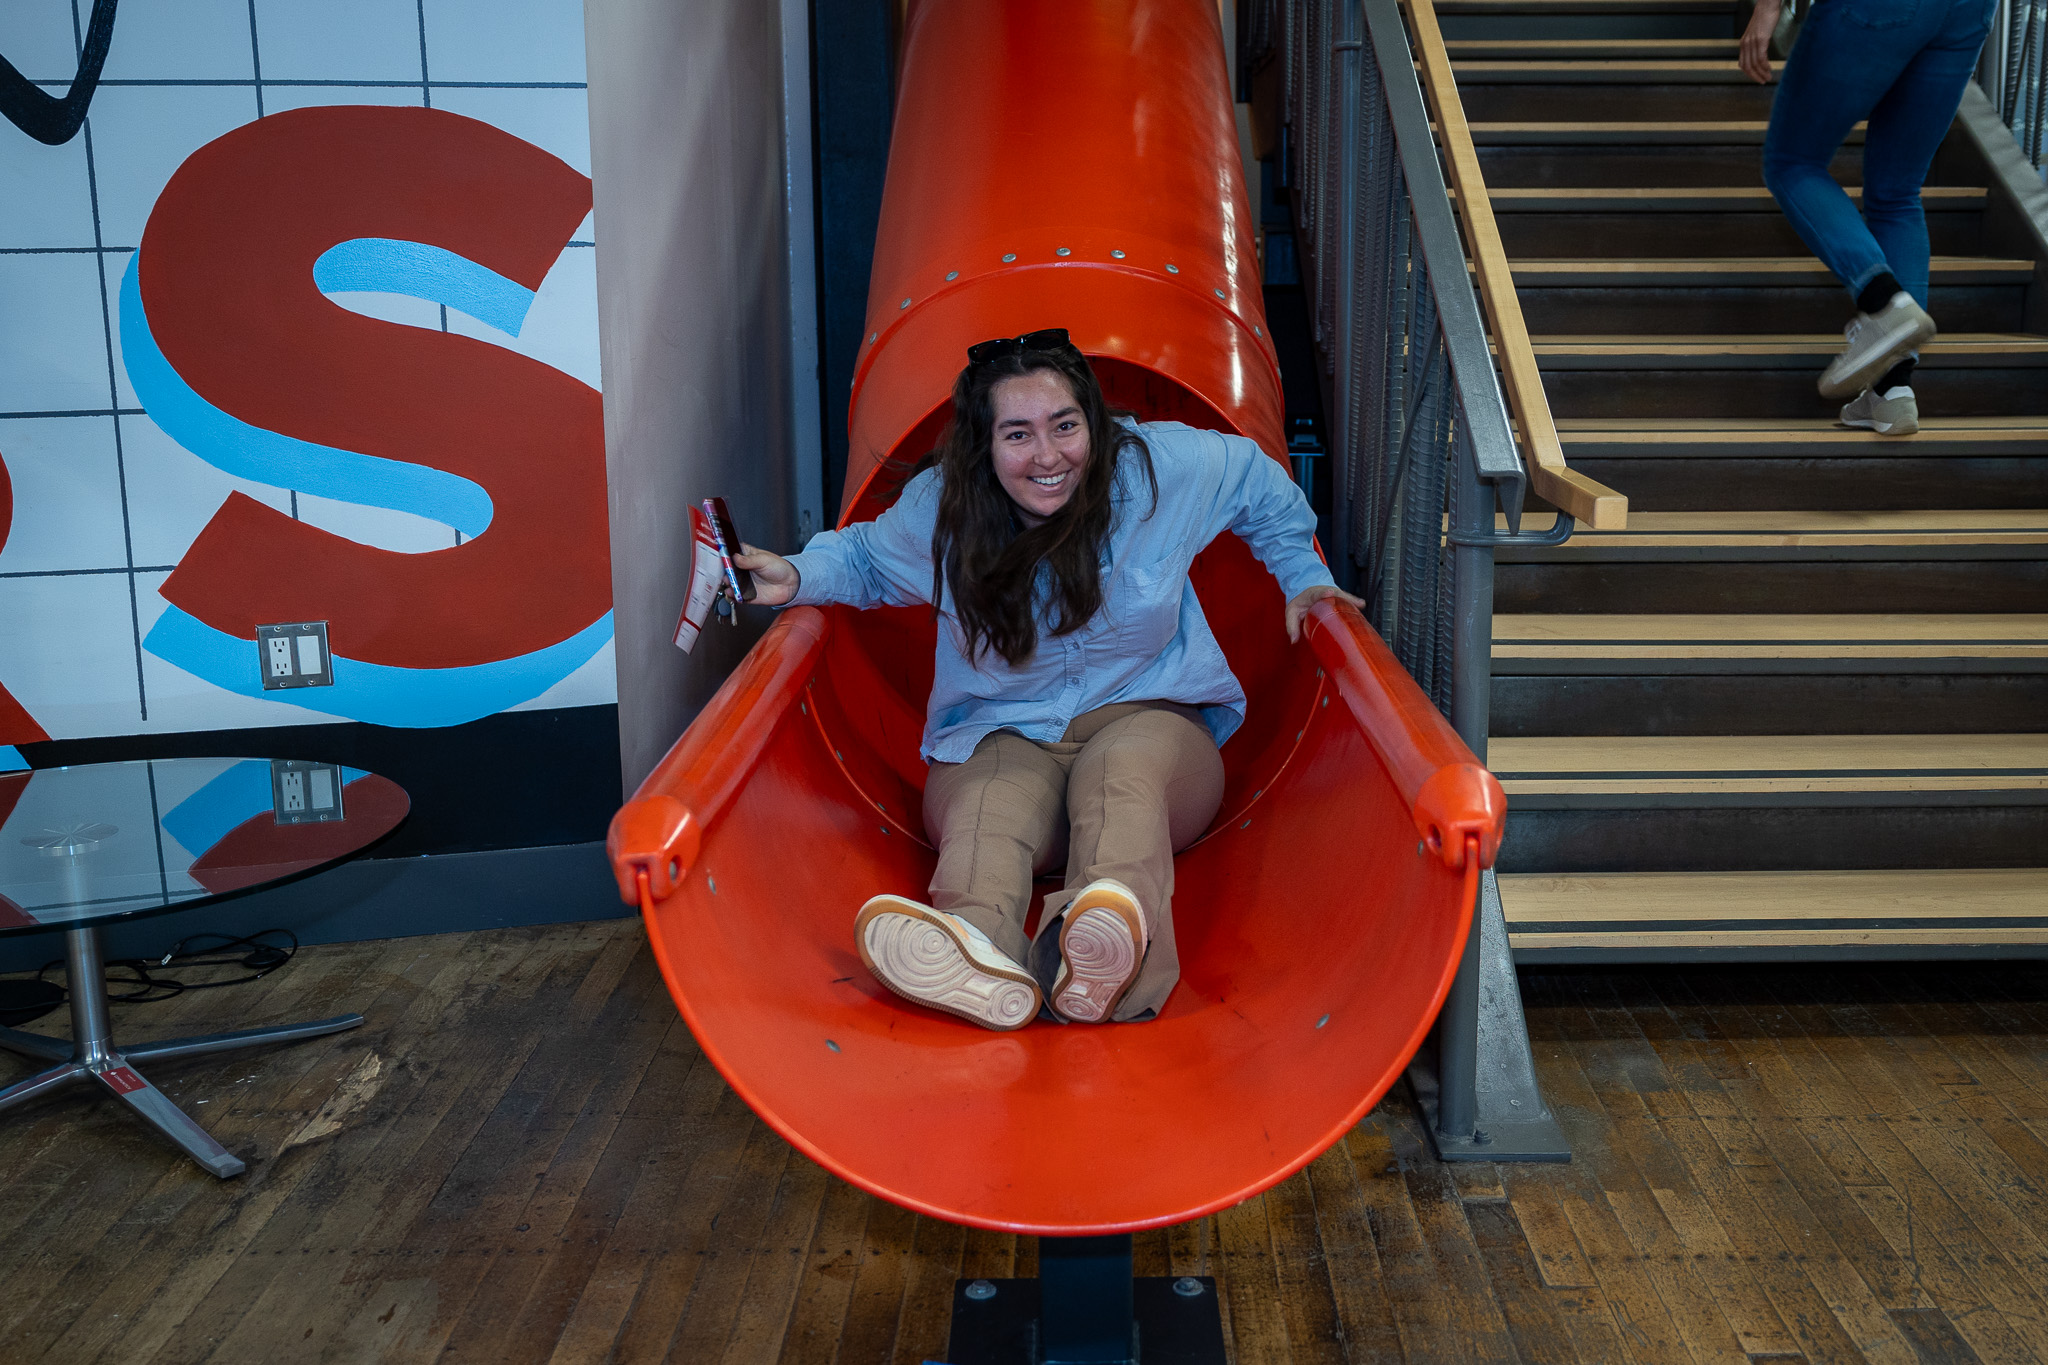 An attendee taking the slide down